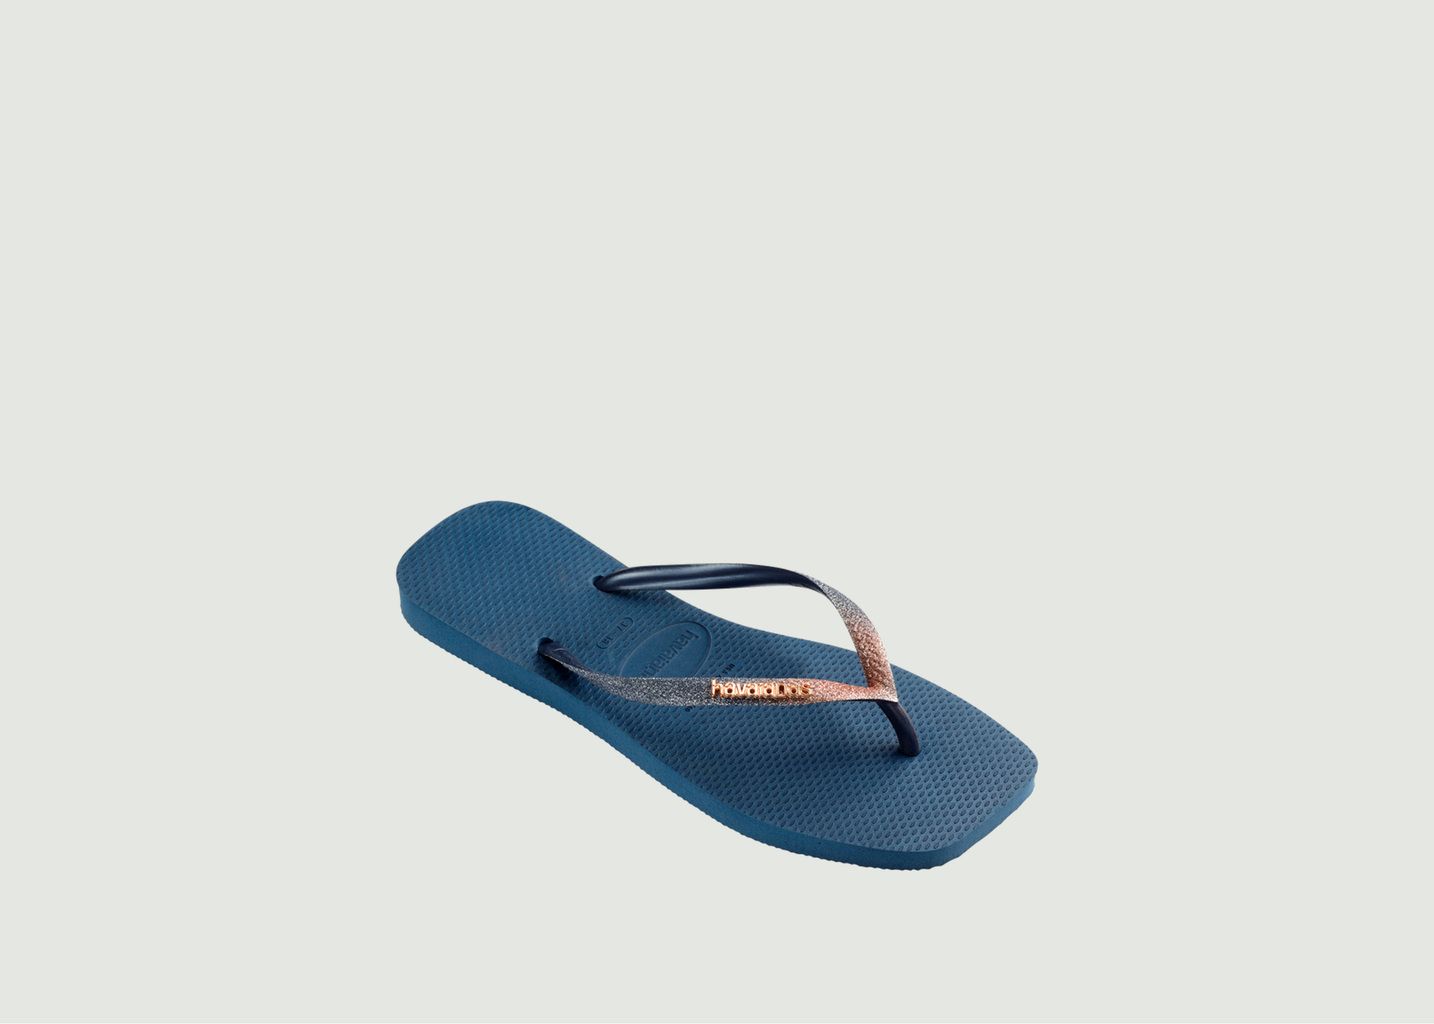 Flip flops with glittery strap Square Glitter - havaianas